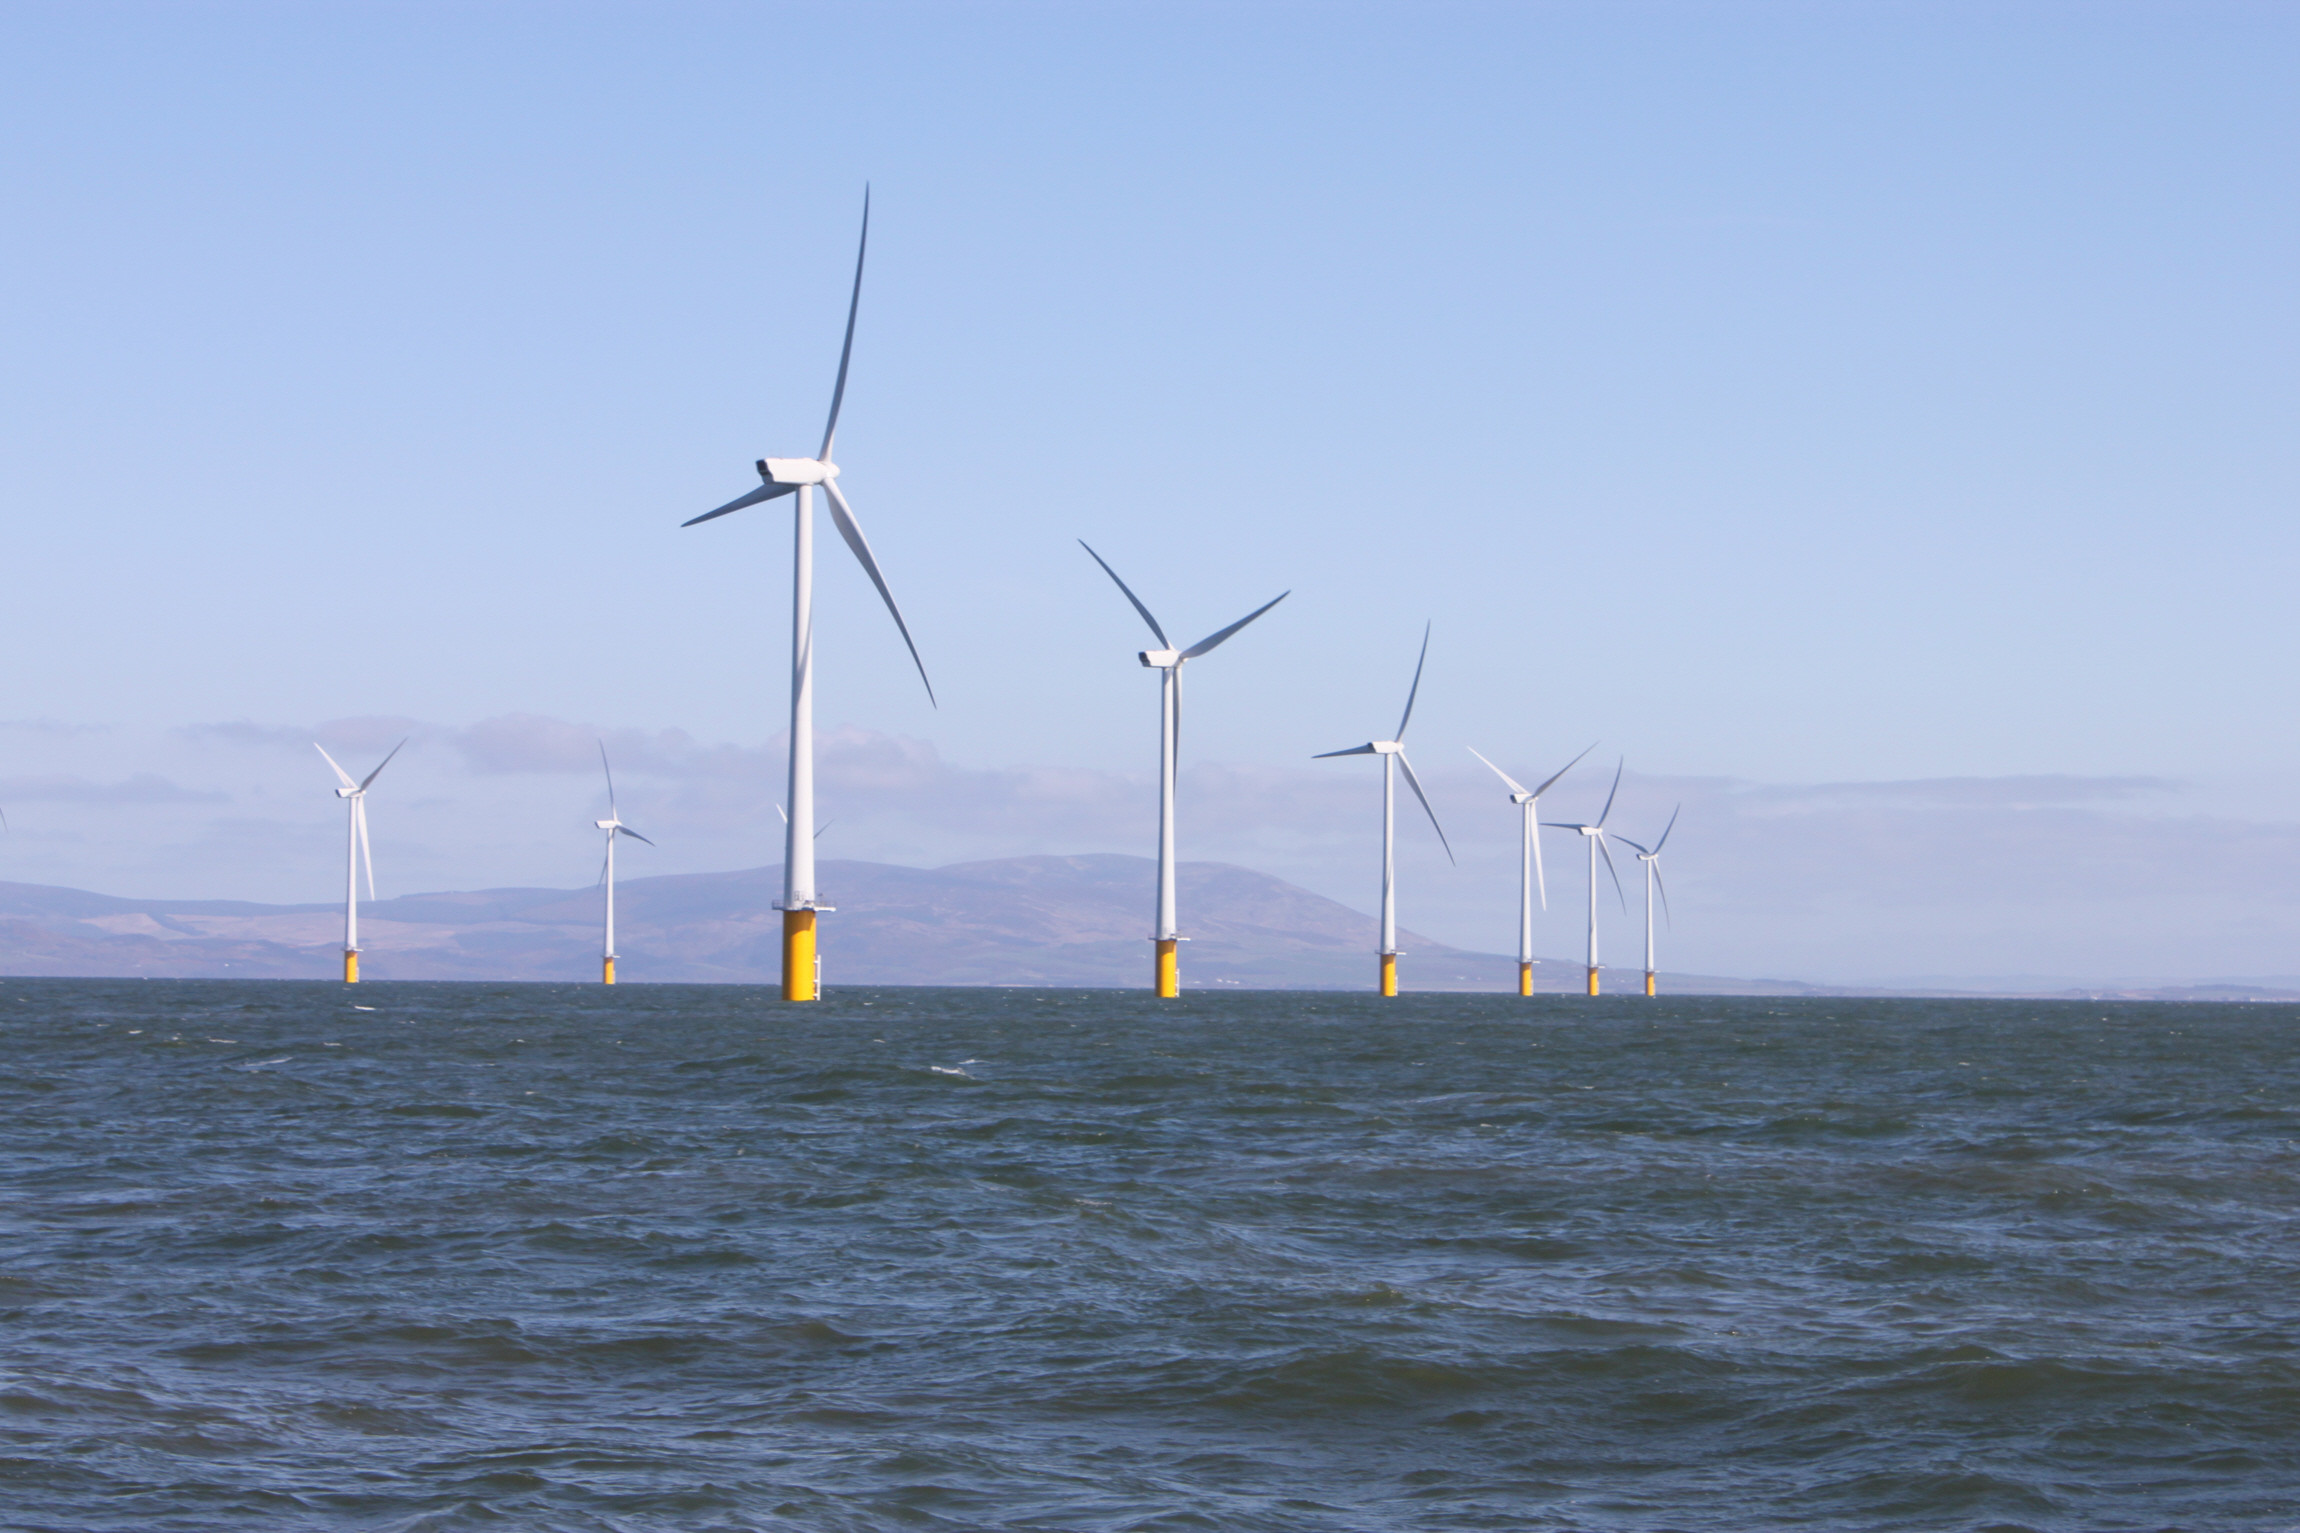 Robin Rigg offshore wind farm in the UK